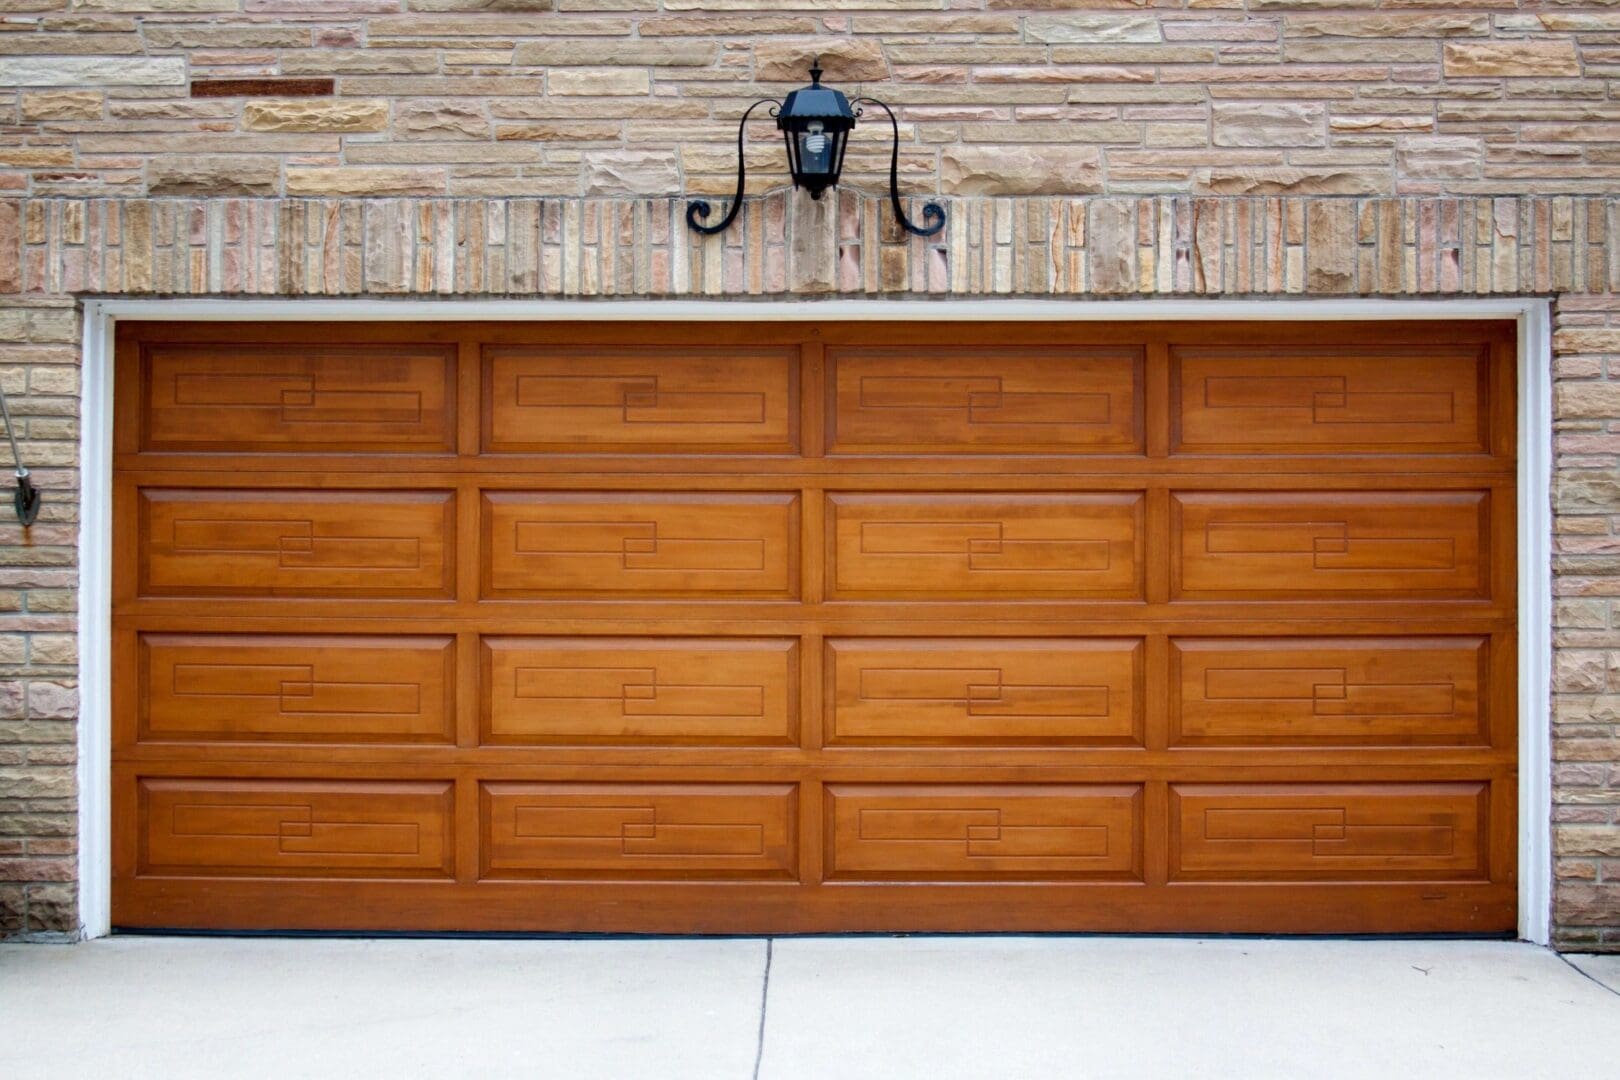 A garage door that is open and has a light on.